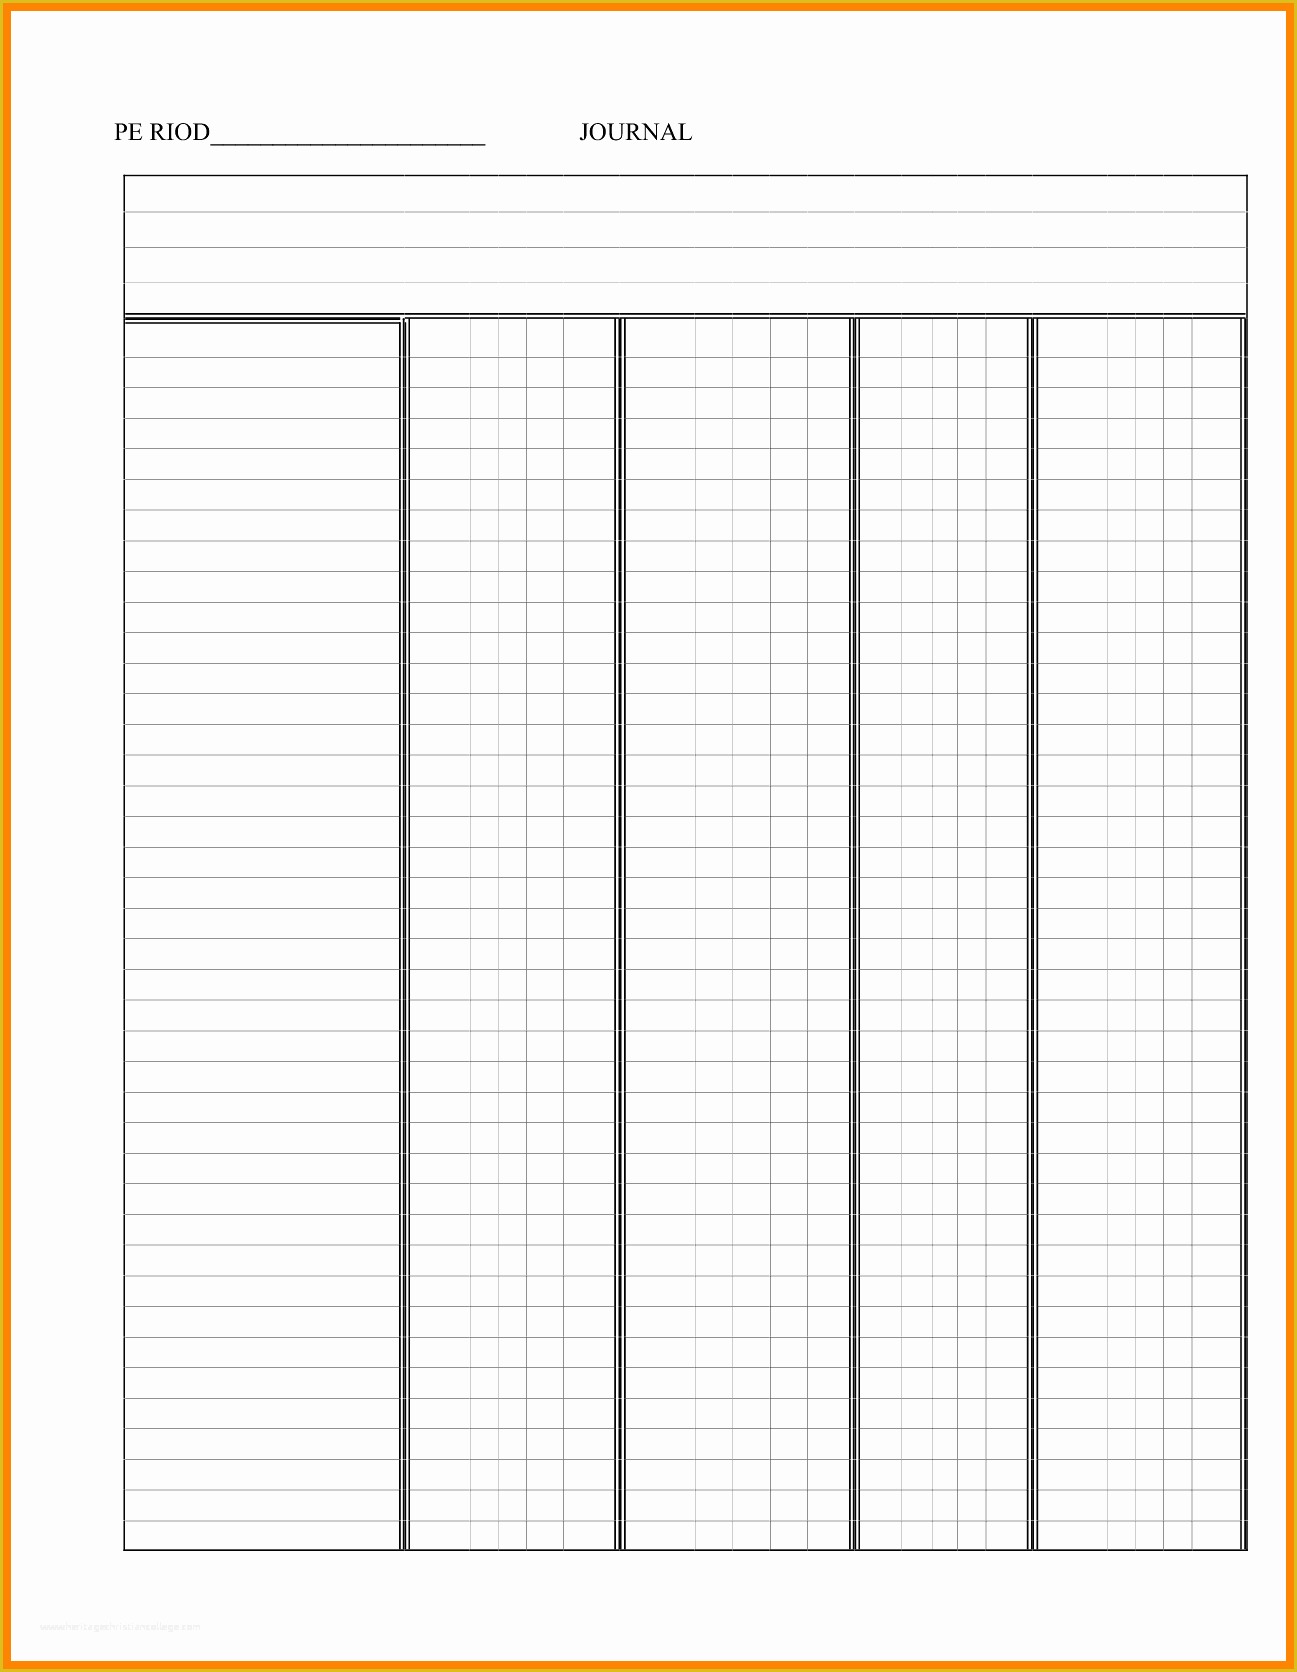 Ledger Sheet Template Free Of 8 Blank Accounting Ledger